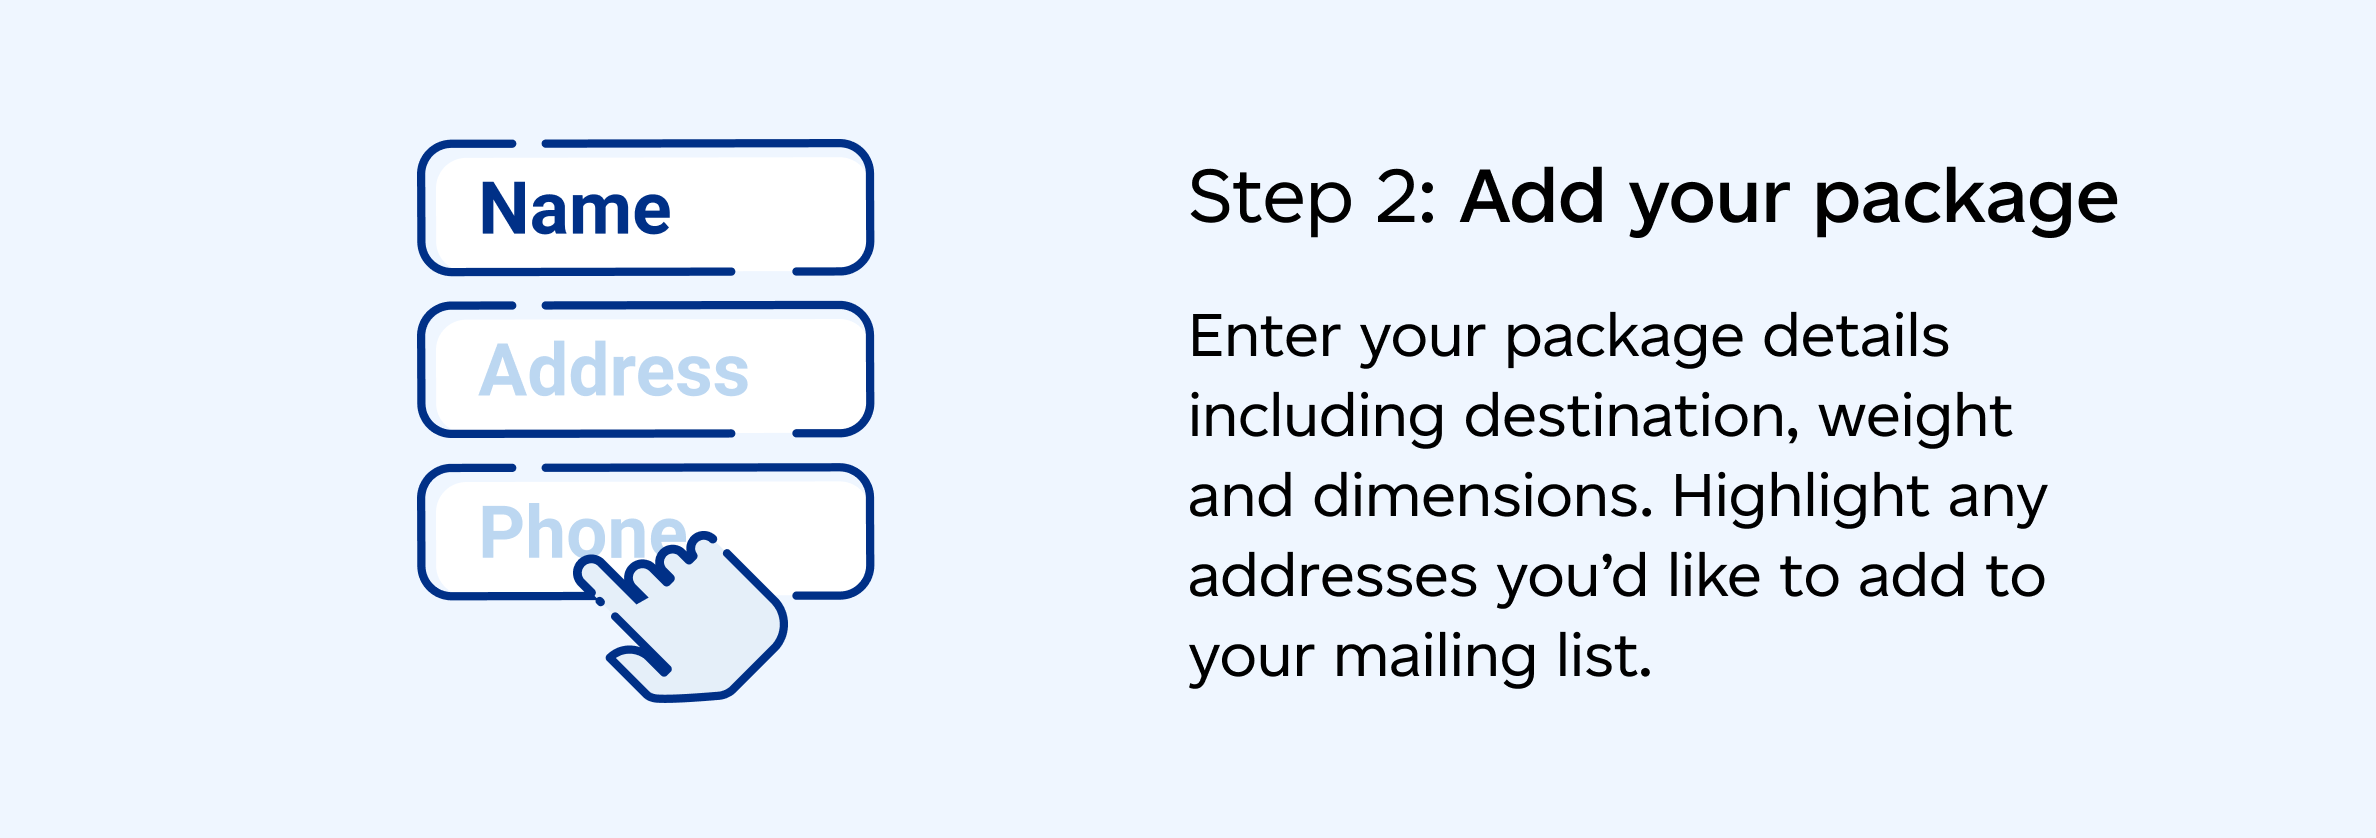 Step 2: Add your package. Enter your package details including destination, weight and dimensions. Highlight addresses to add to your mailing list.